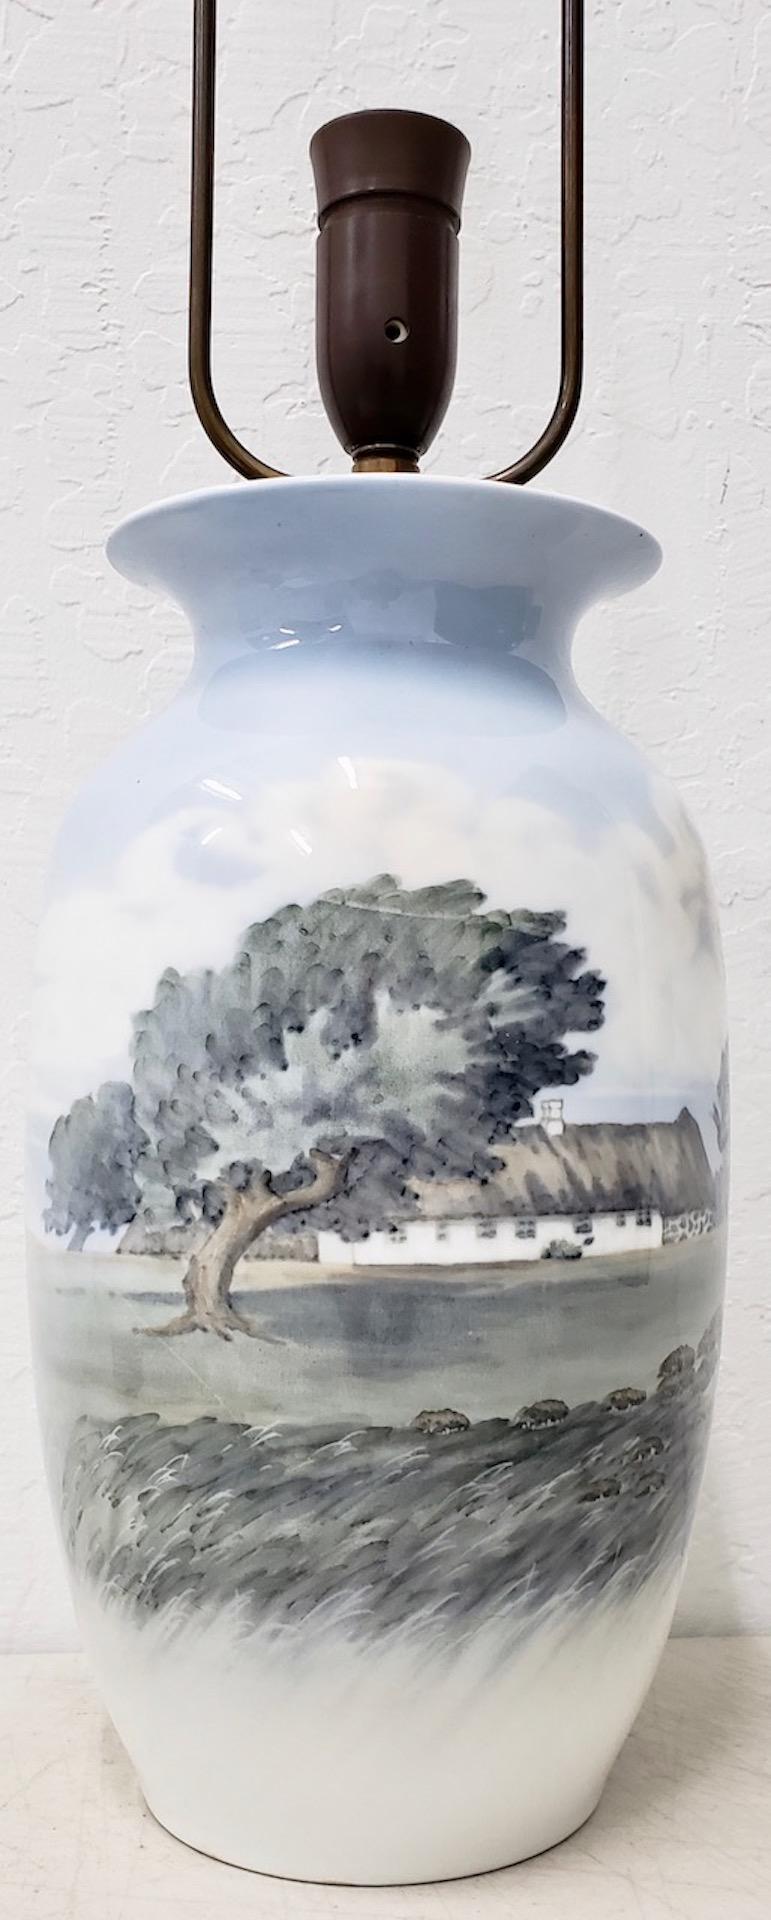 Vintage Royal Copenhagen country home vase converted to table lamp circa1920s

Beautiful vintage hand painted Royal Copenhagen vase converted into a table lamp.

The vase is very lovely and shows a few minor scuffs. No chips. No